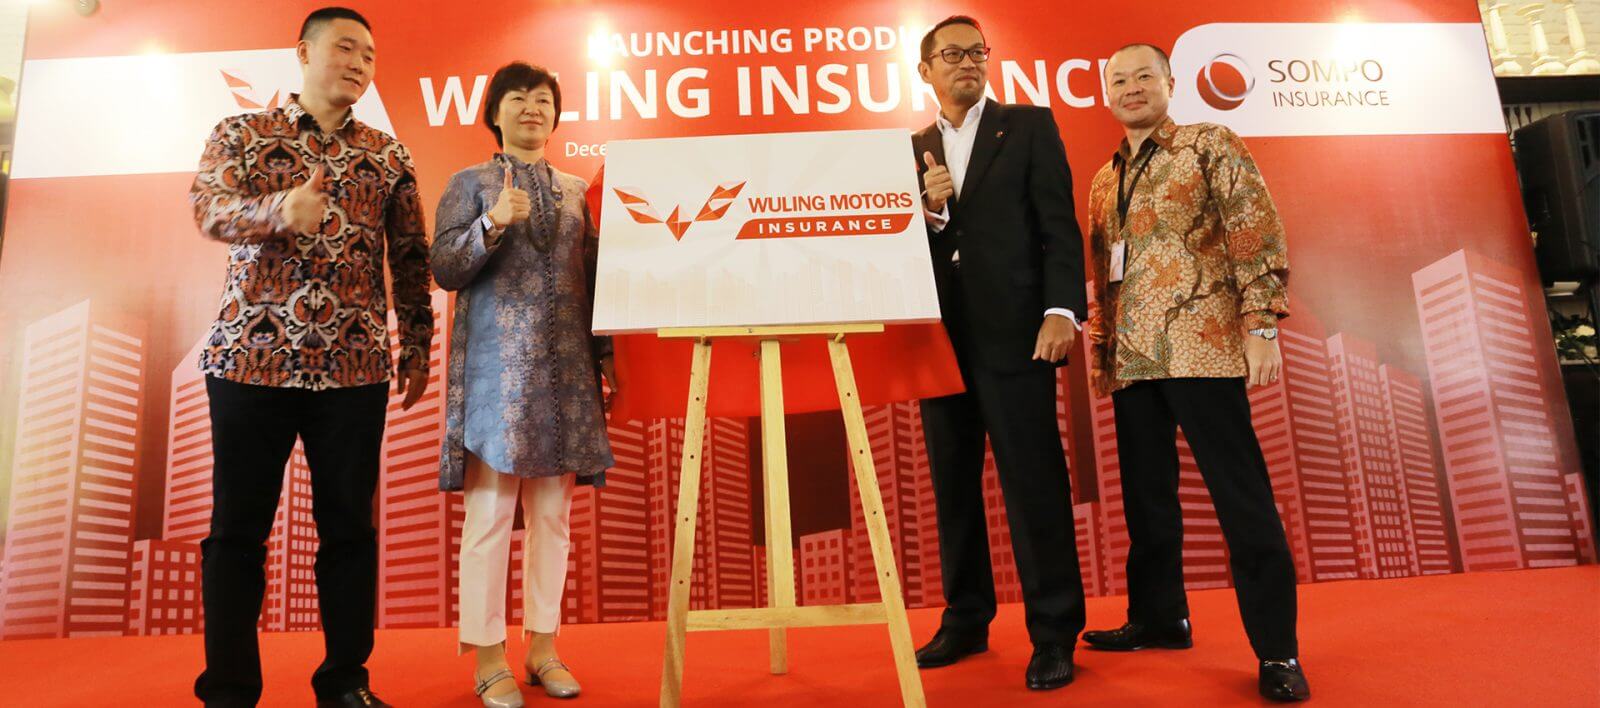 Image Sompo Insurance and Wuling Motors Launch ‘Wuling Insurance’